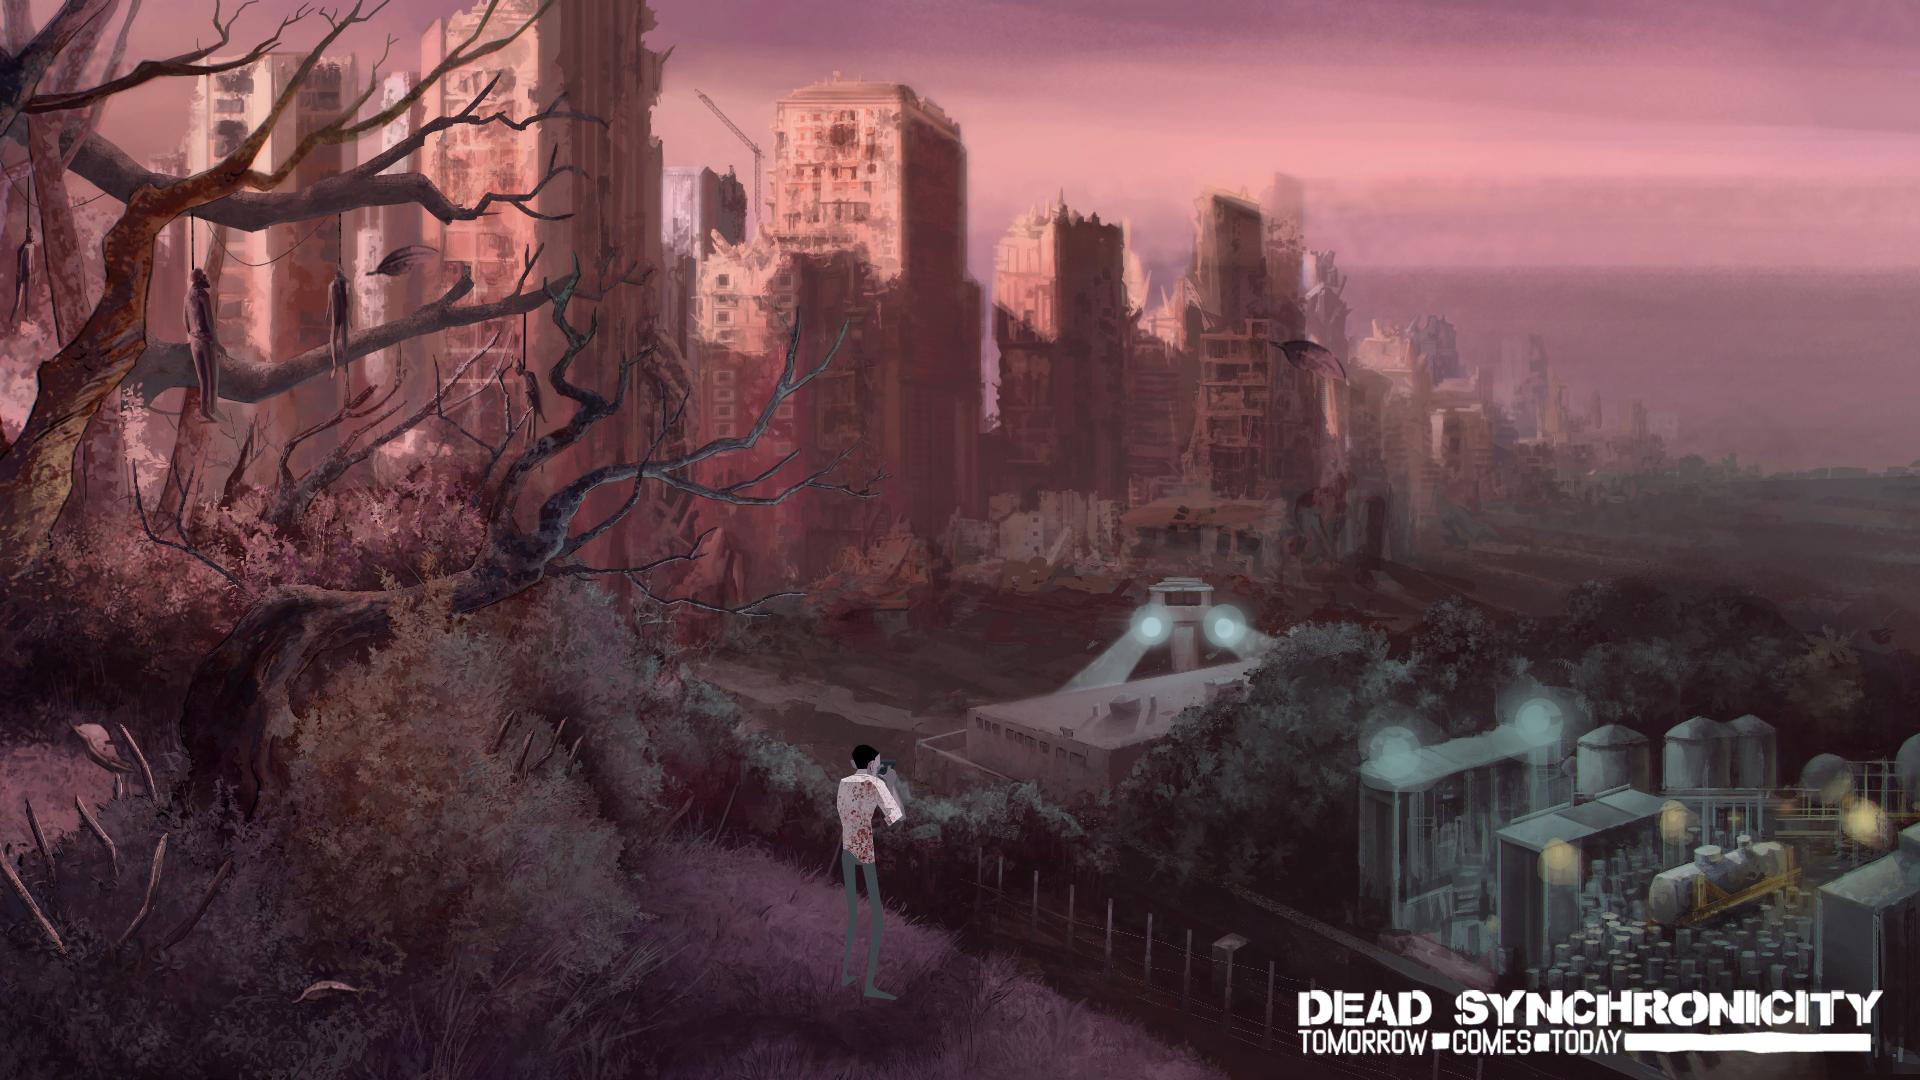 Dead Synchronicity: Tomorrow Comes Today #12